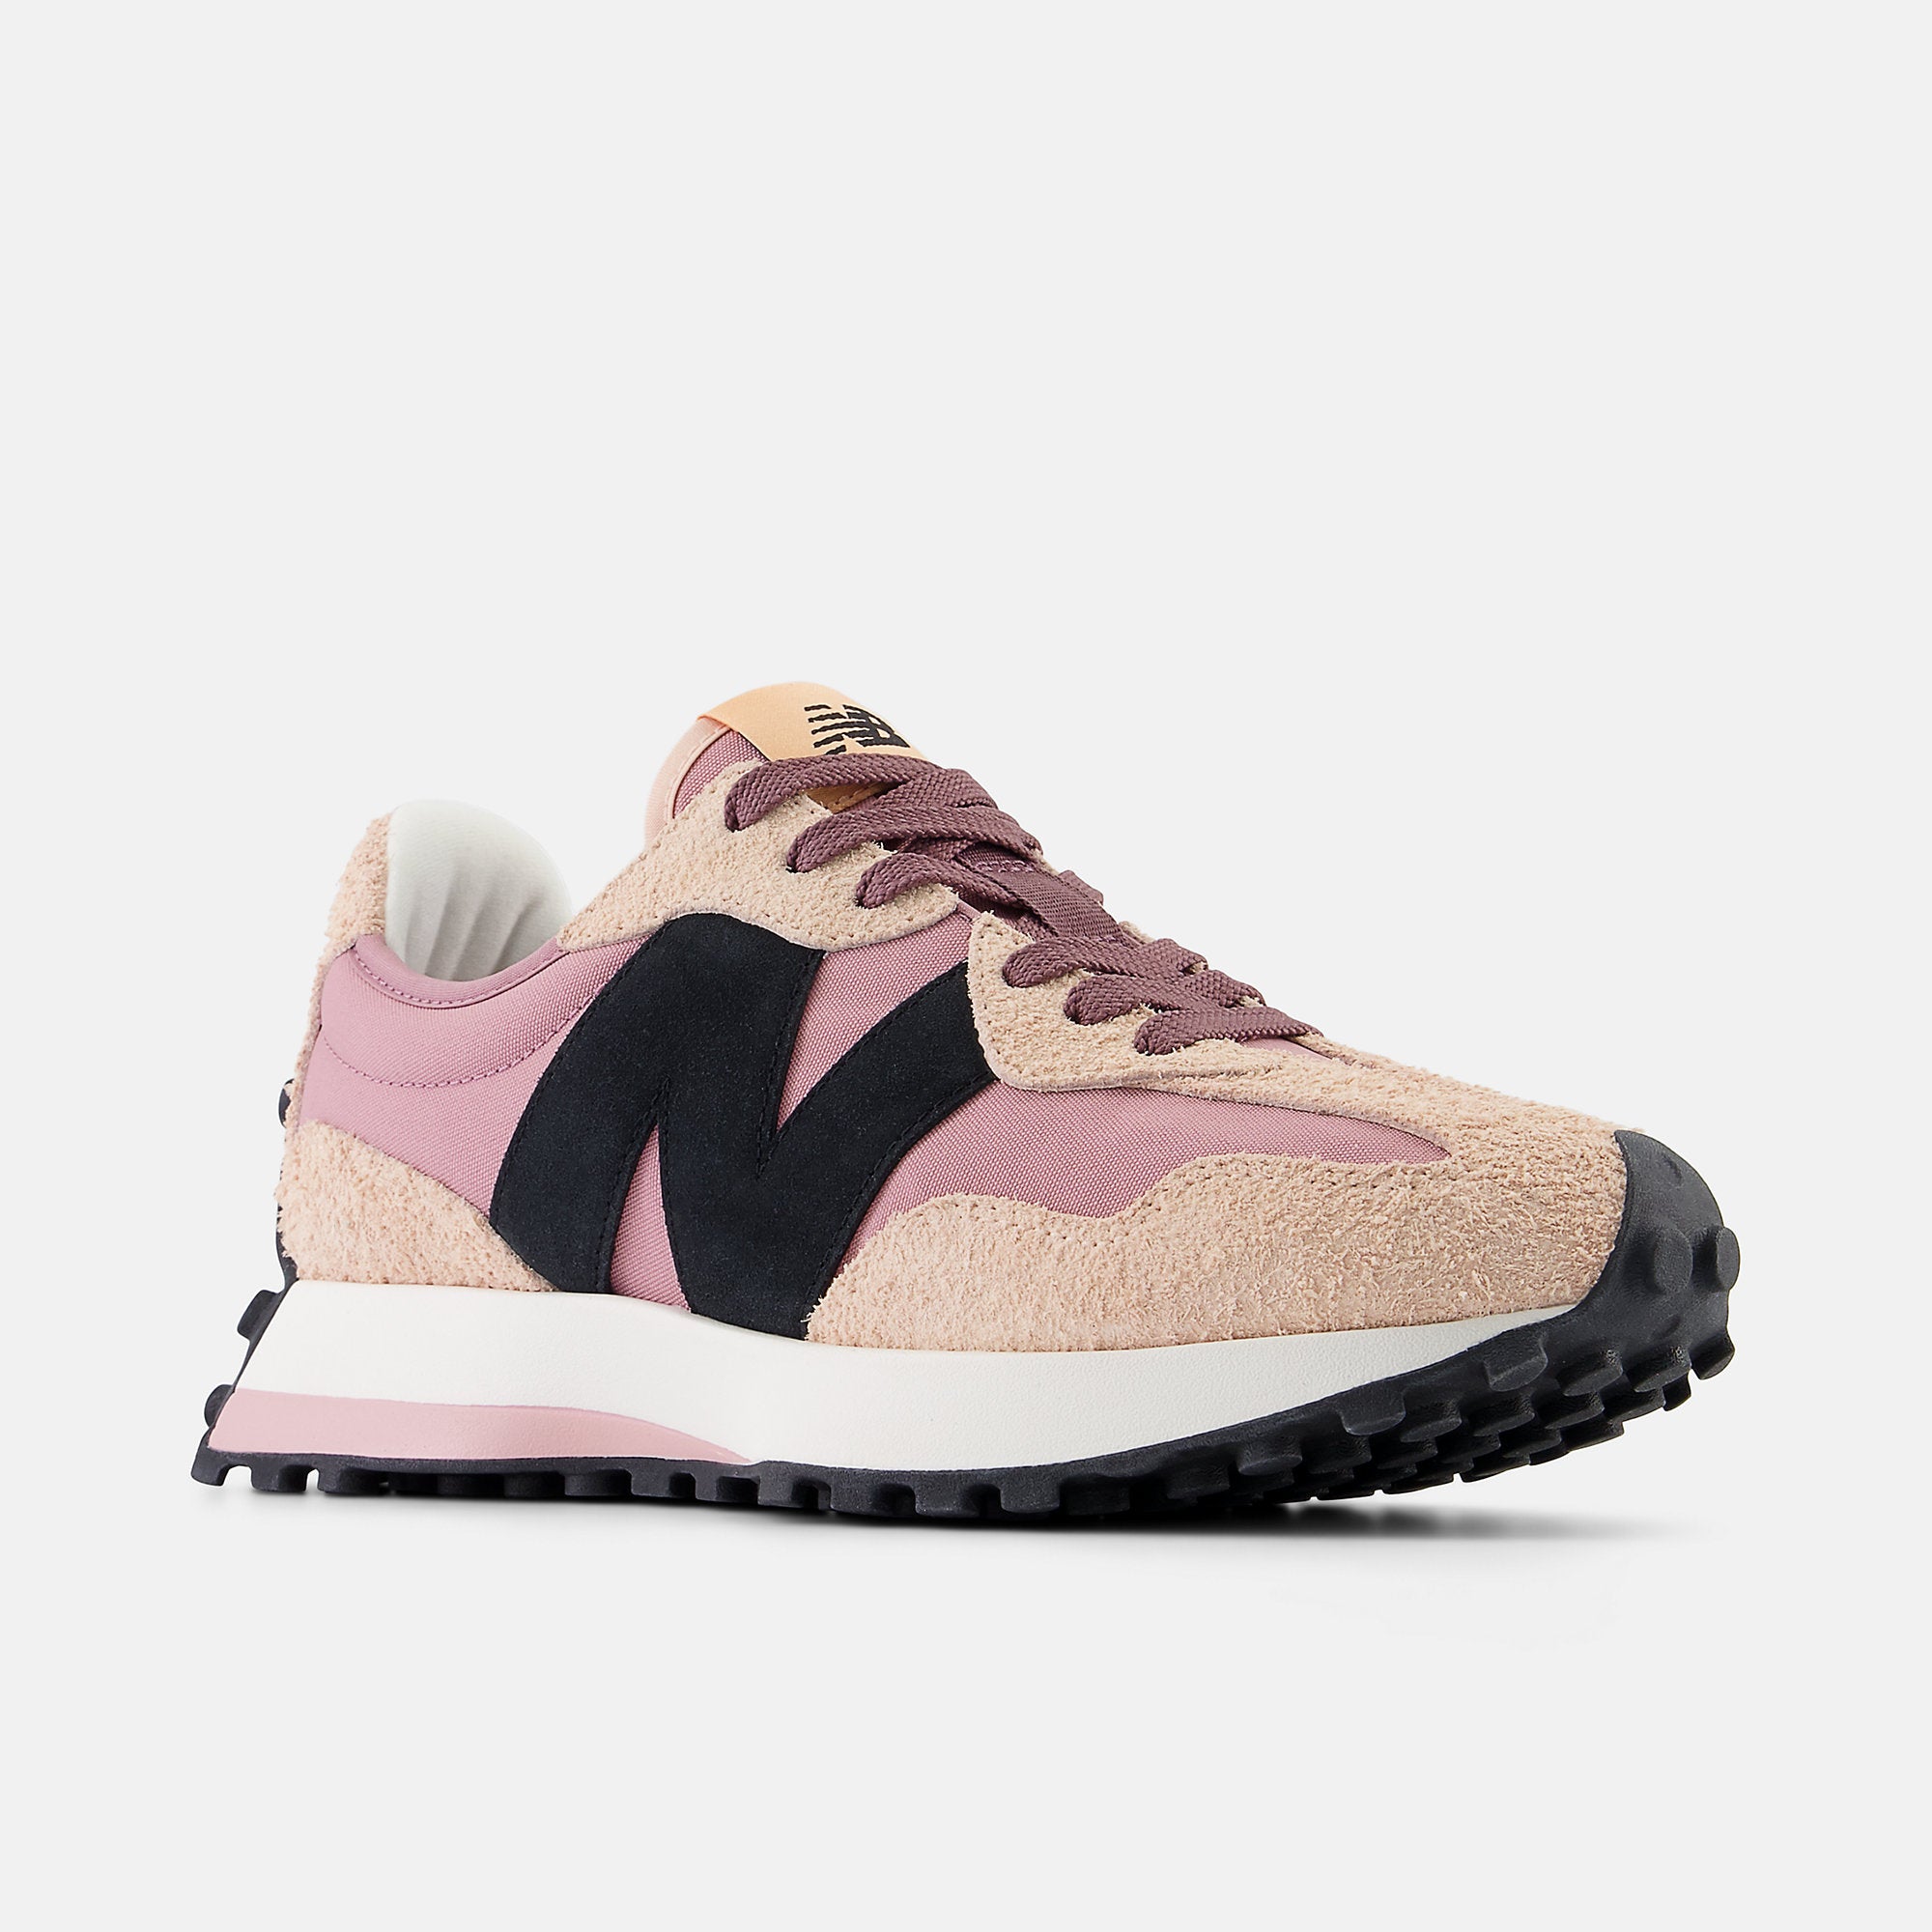 New Balance Womens 327 Fashion Trainers - Pink / Coral